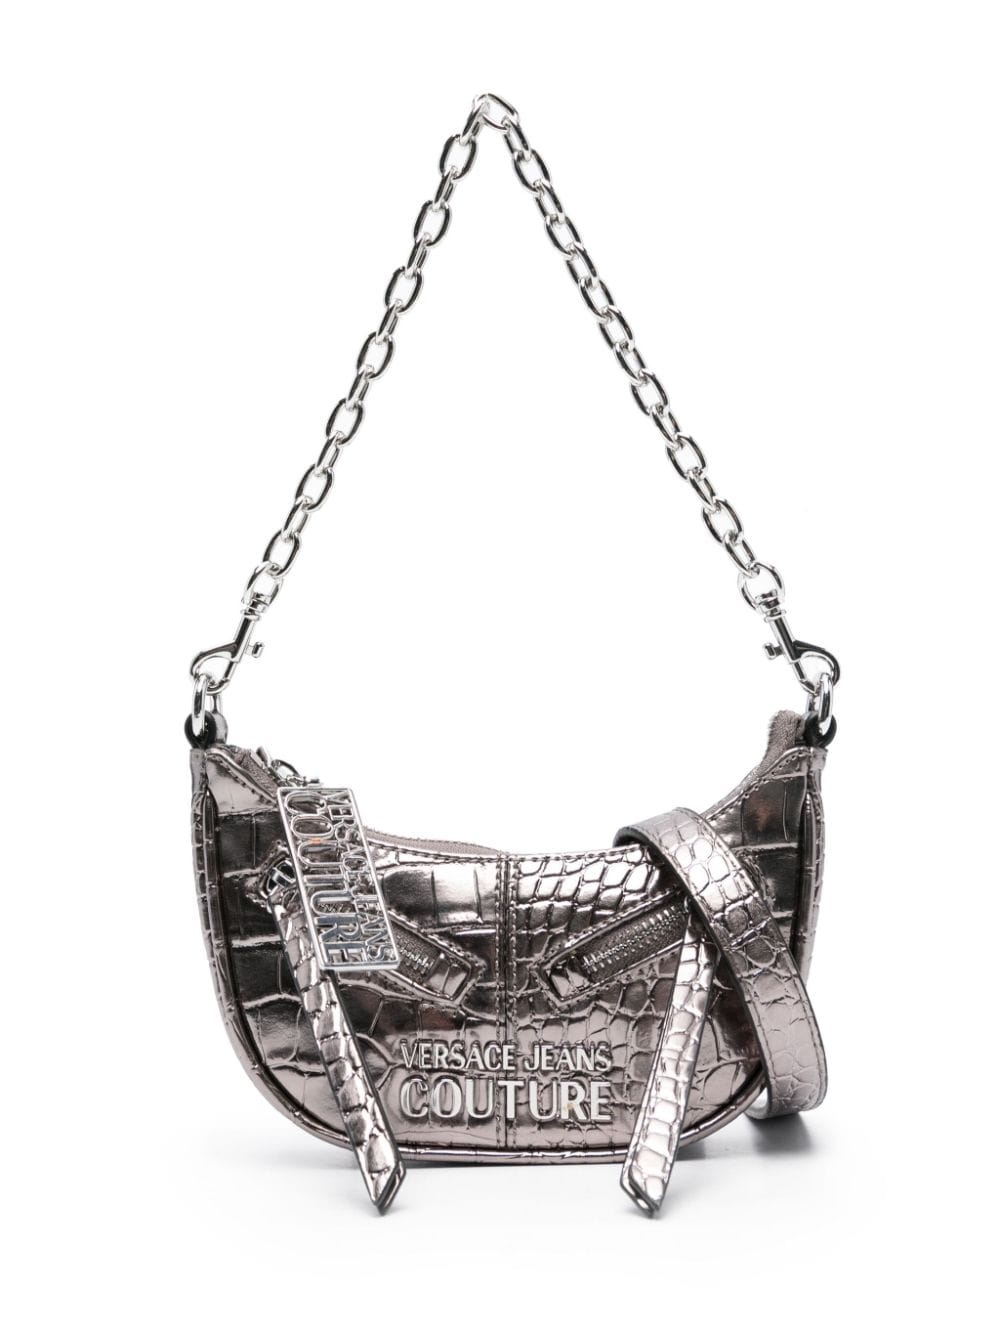 Versace Jeans Couture Reversible Shopping Bag in Metallic